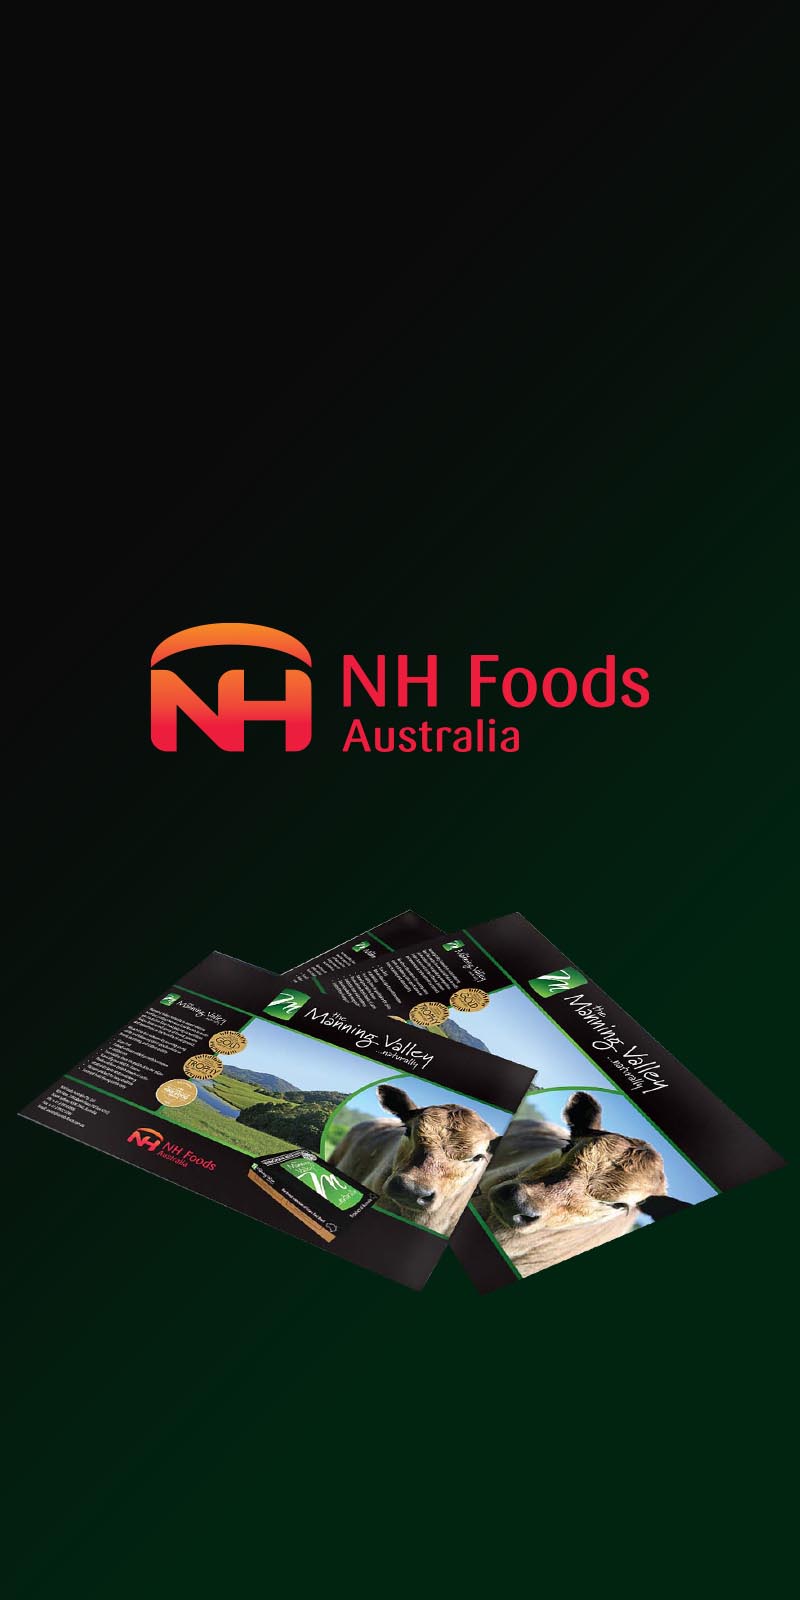 NH Foods flyer design by Think Creative Agency